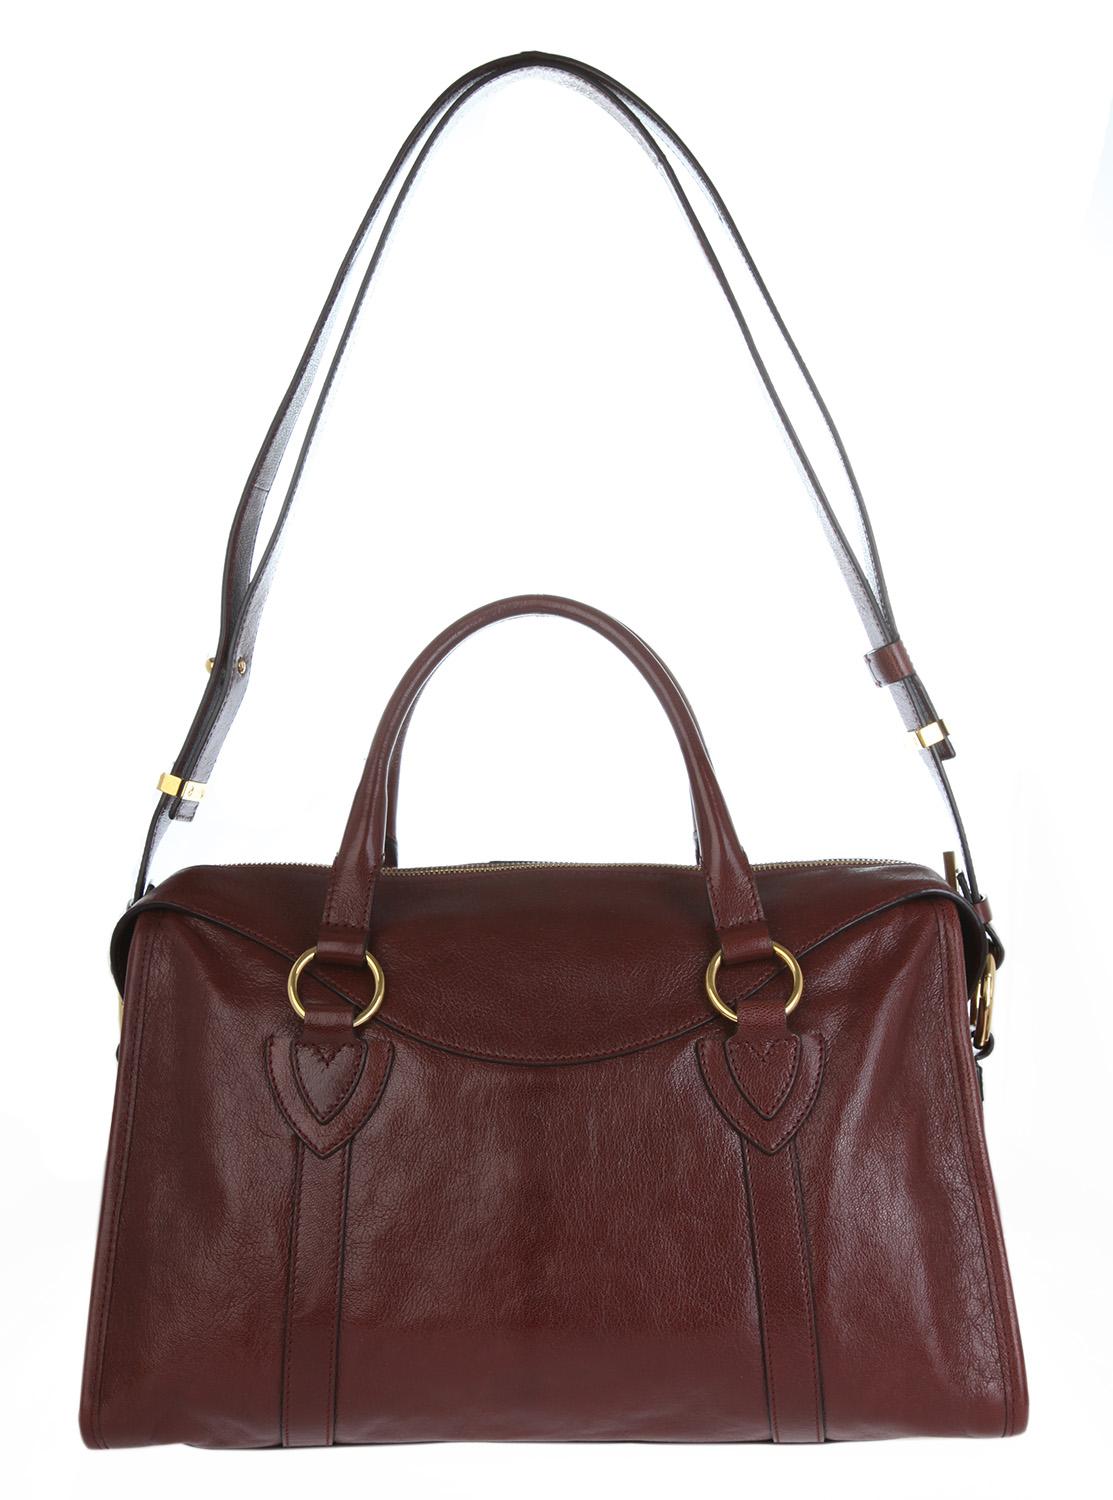 Item number: C3PE025-81500
Color: Chesnut
Material: leather, Lining: jacquard
Compartments: 1 main compartment, 1 zipper pocket, 1 slip pocket; Exterior Details: 1 zipper pocket
Size: width 36 cm, height 23 cm, depth 16 cm
Closure: Zipper
Weight in